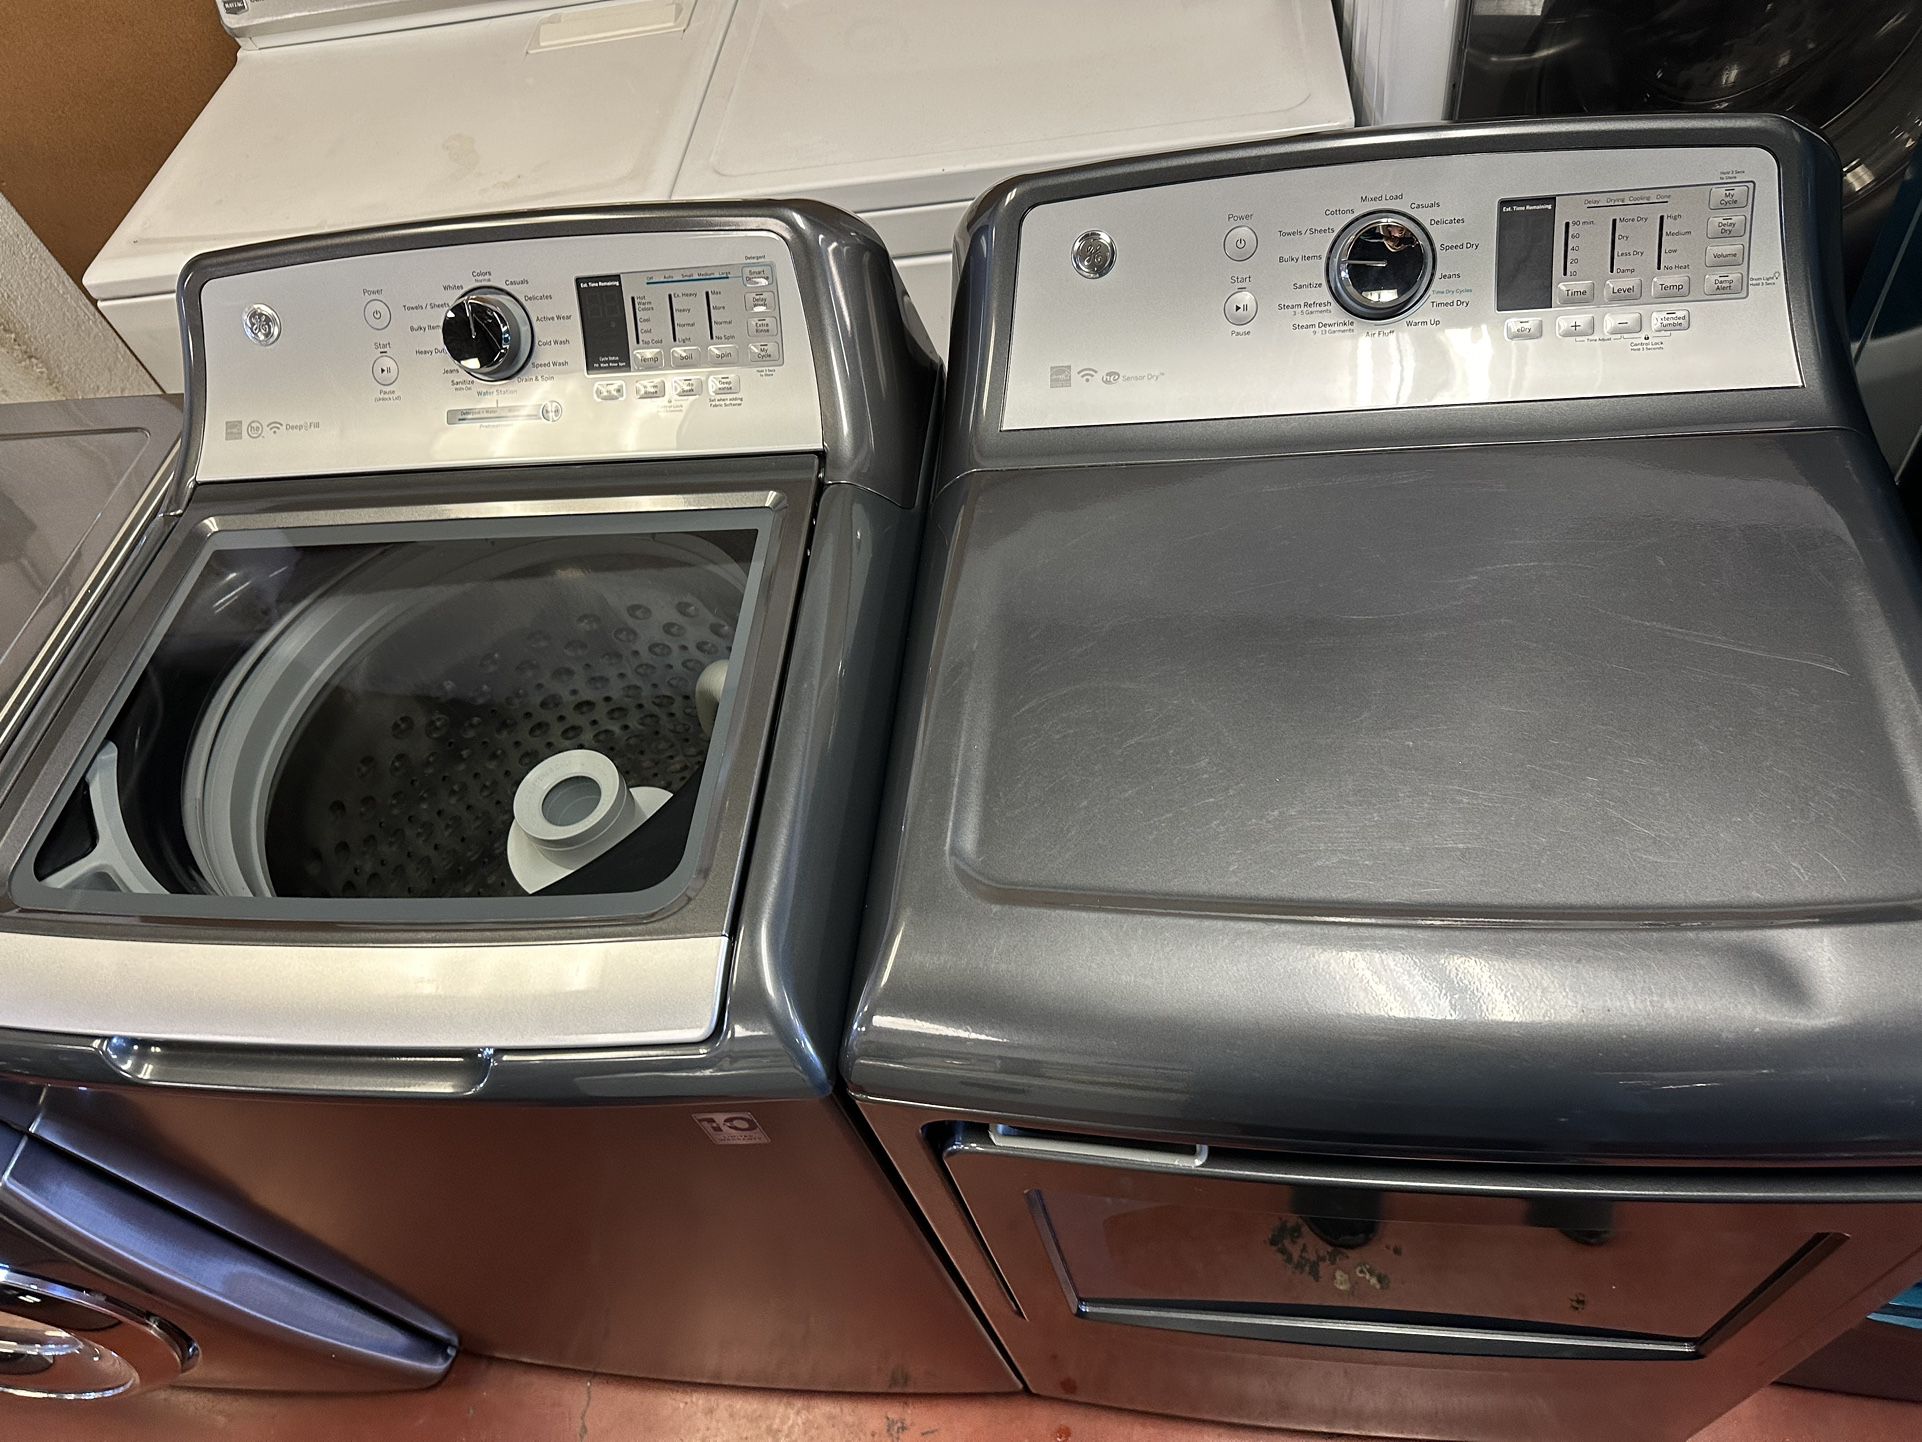 GE Washer And Dryer Electric Set 